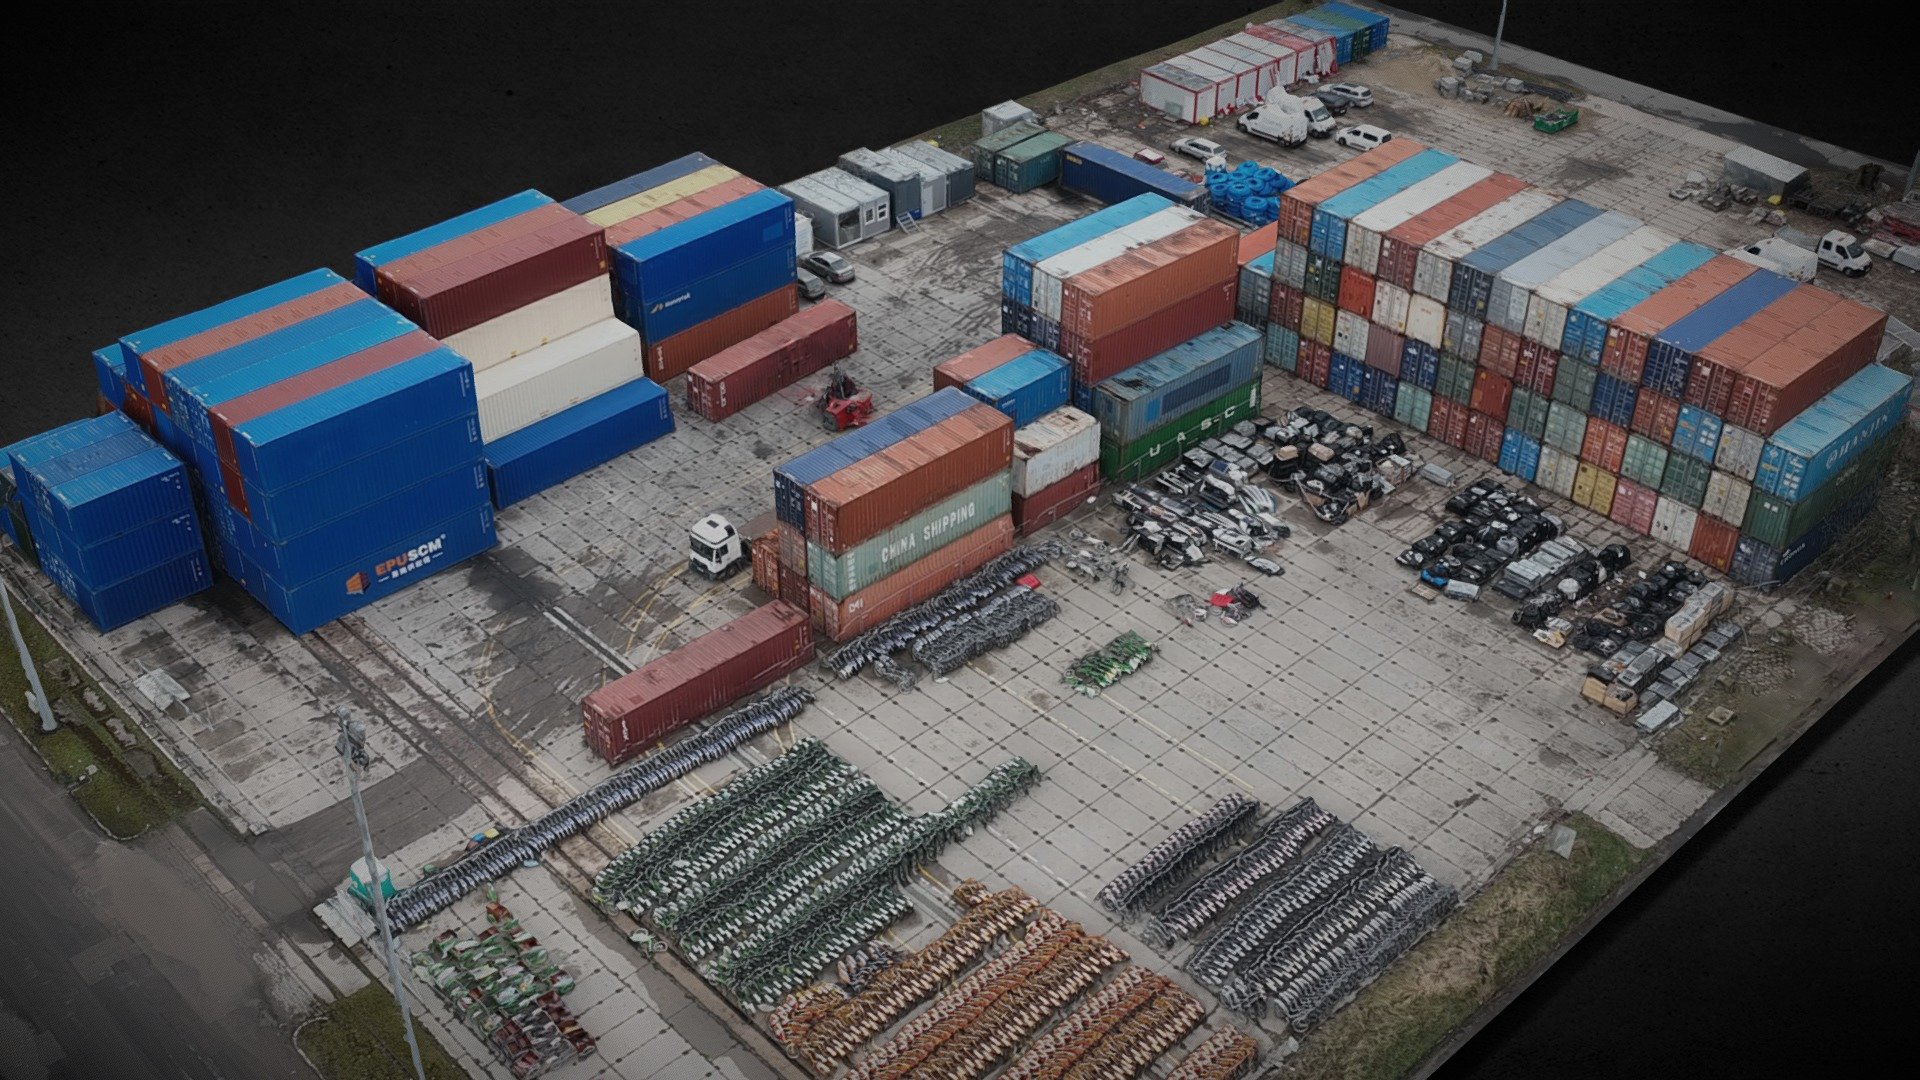 DJI Mavic 3 drone - aerial photogrammetry containers factory &amp; environment
maps 8k: diffuse
maps 4k: roughness, nrm, bump, ao
cleaned geometry, no retopology - containers storage photoscan DJI mavic 3 drone - Buy Royalty Free 3D model by looppy 3d model